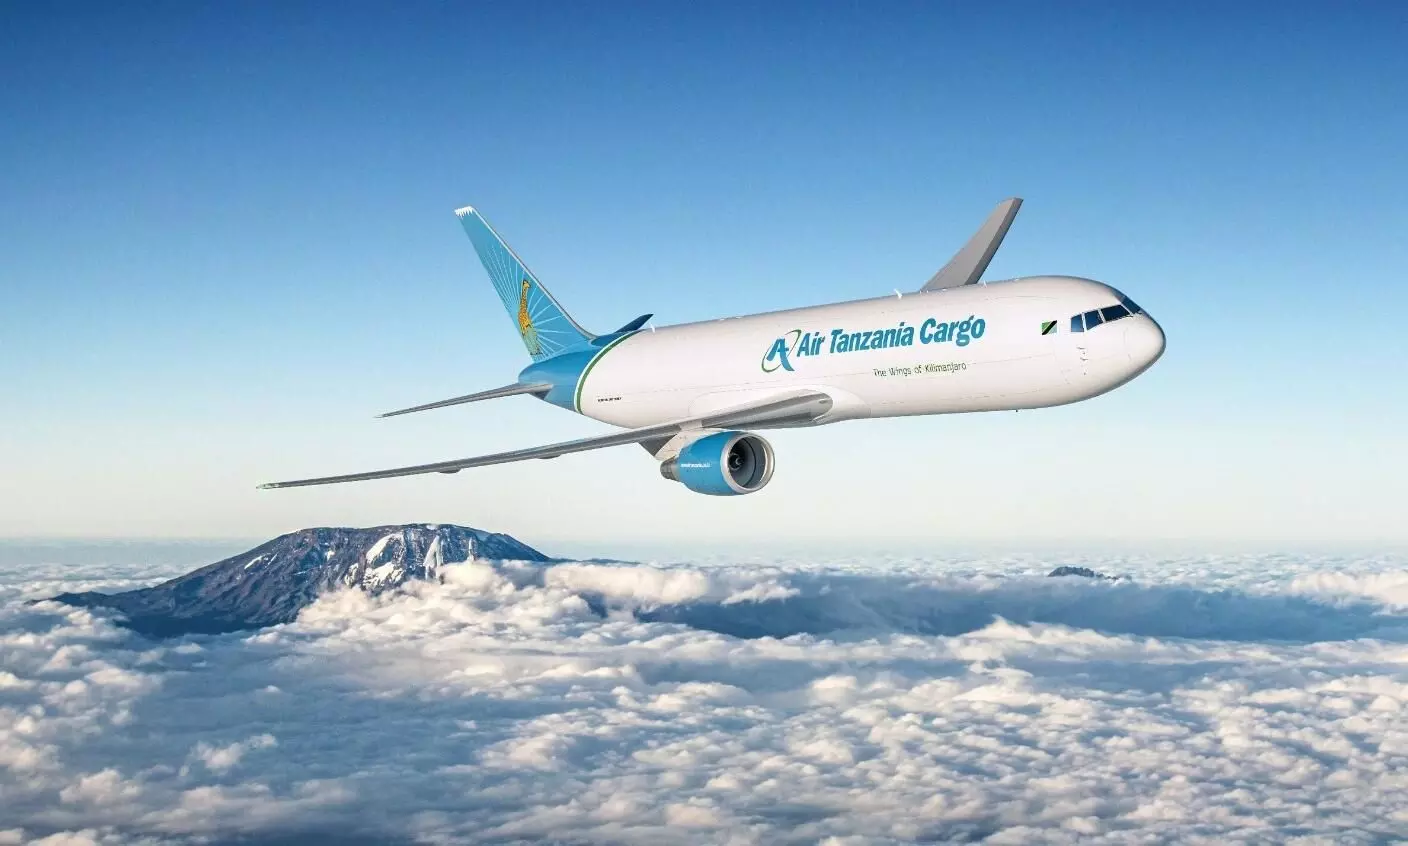 Boeing, Air Tanzania celebrate 1st 767 freighter delivery to Africa